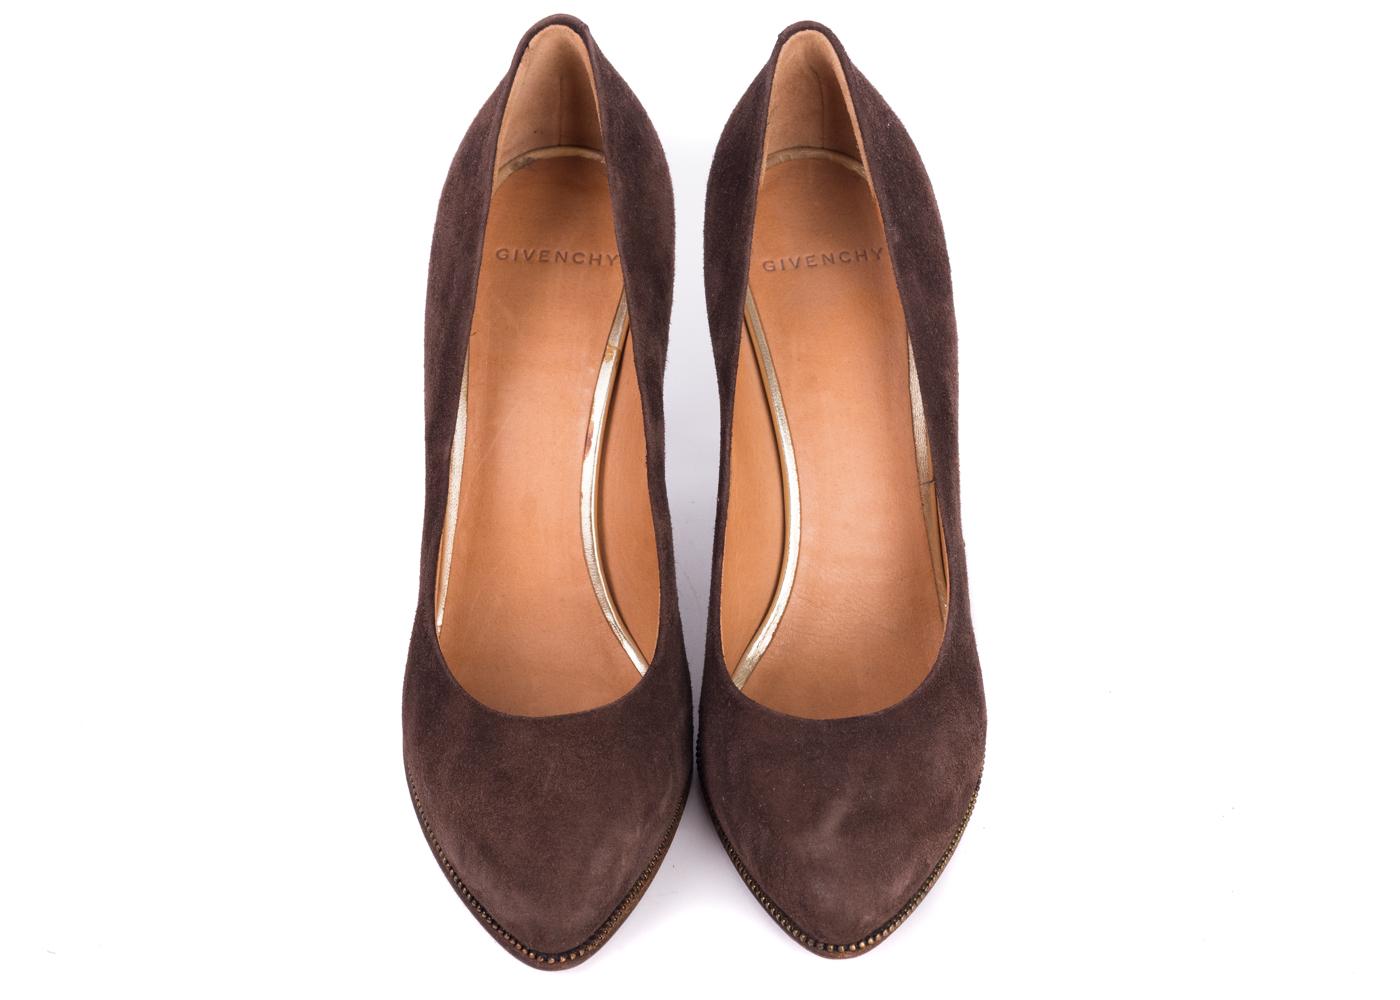 Givenchy Brown Suede Zipper Trimmed Mid Pumps For Sale 1